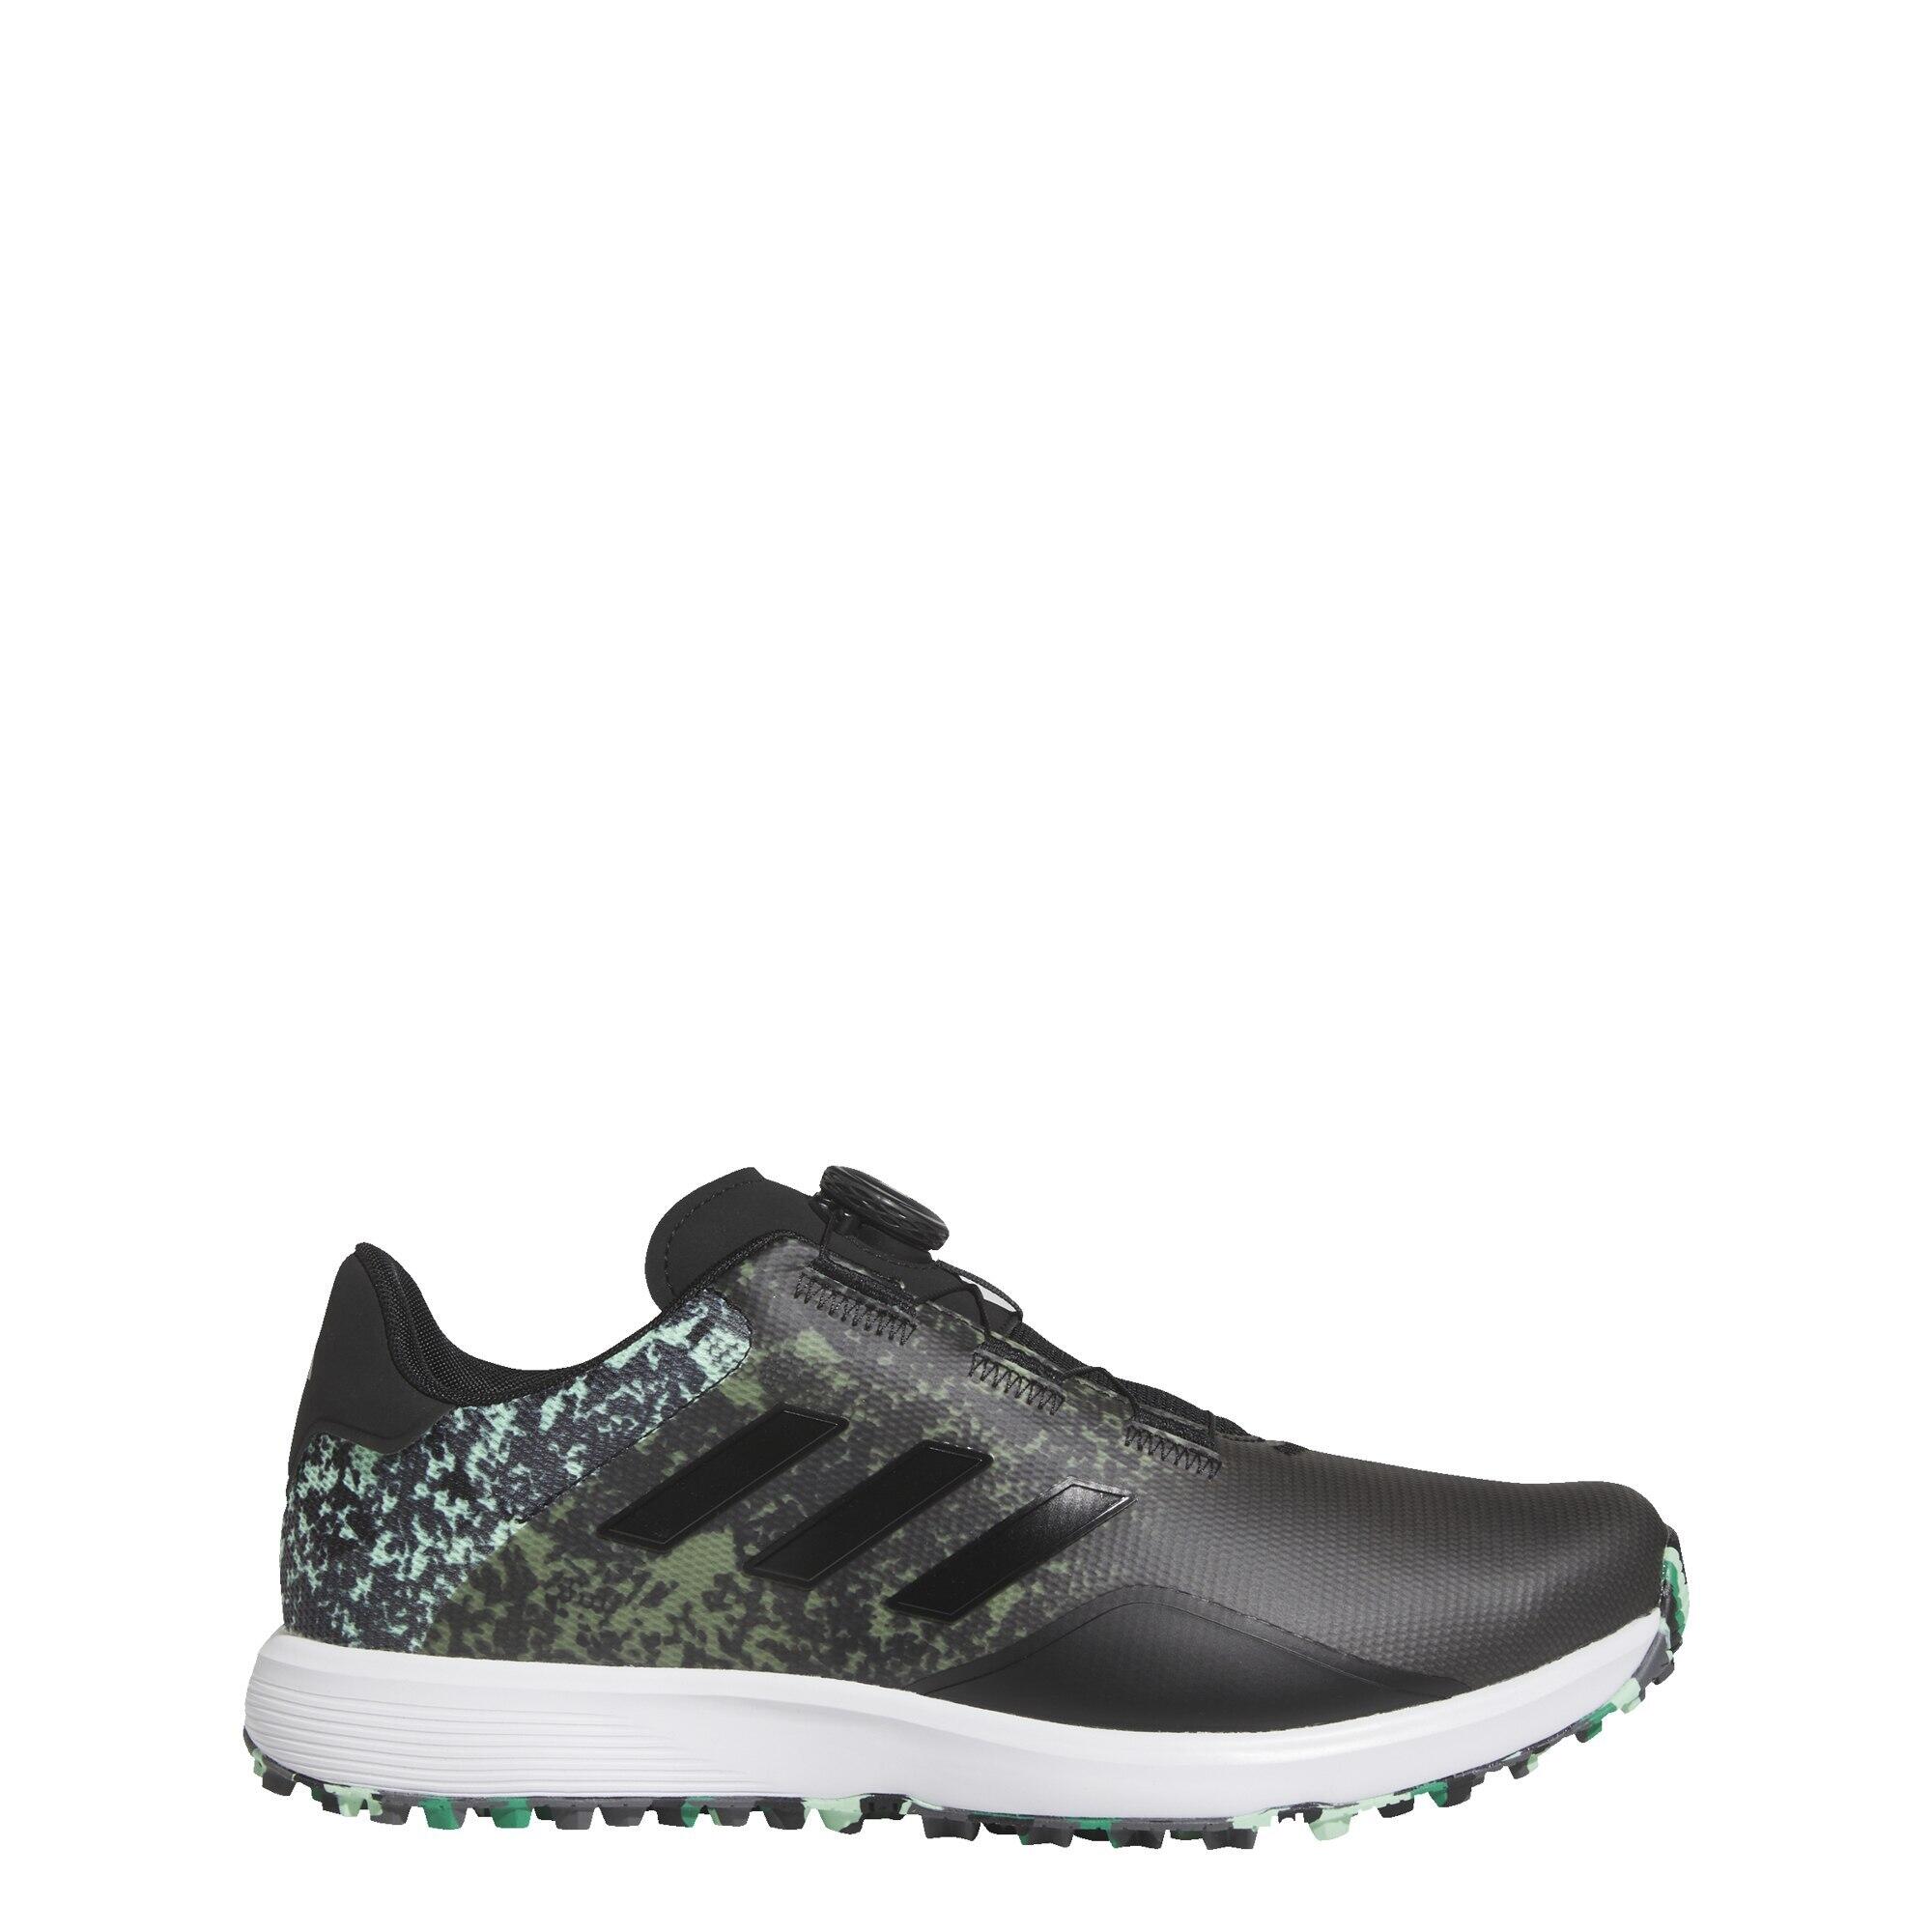 ADIDAS S2G SL 23 Wide Golf Shoes